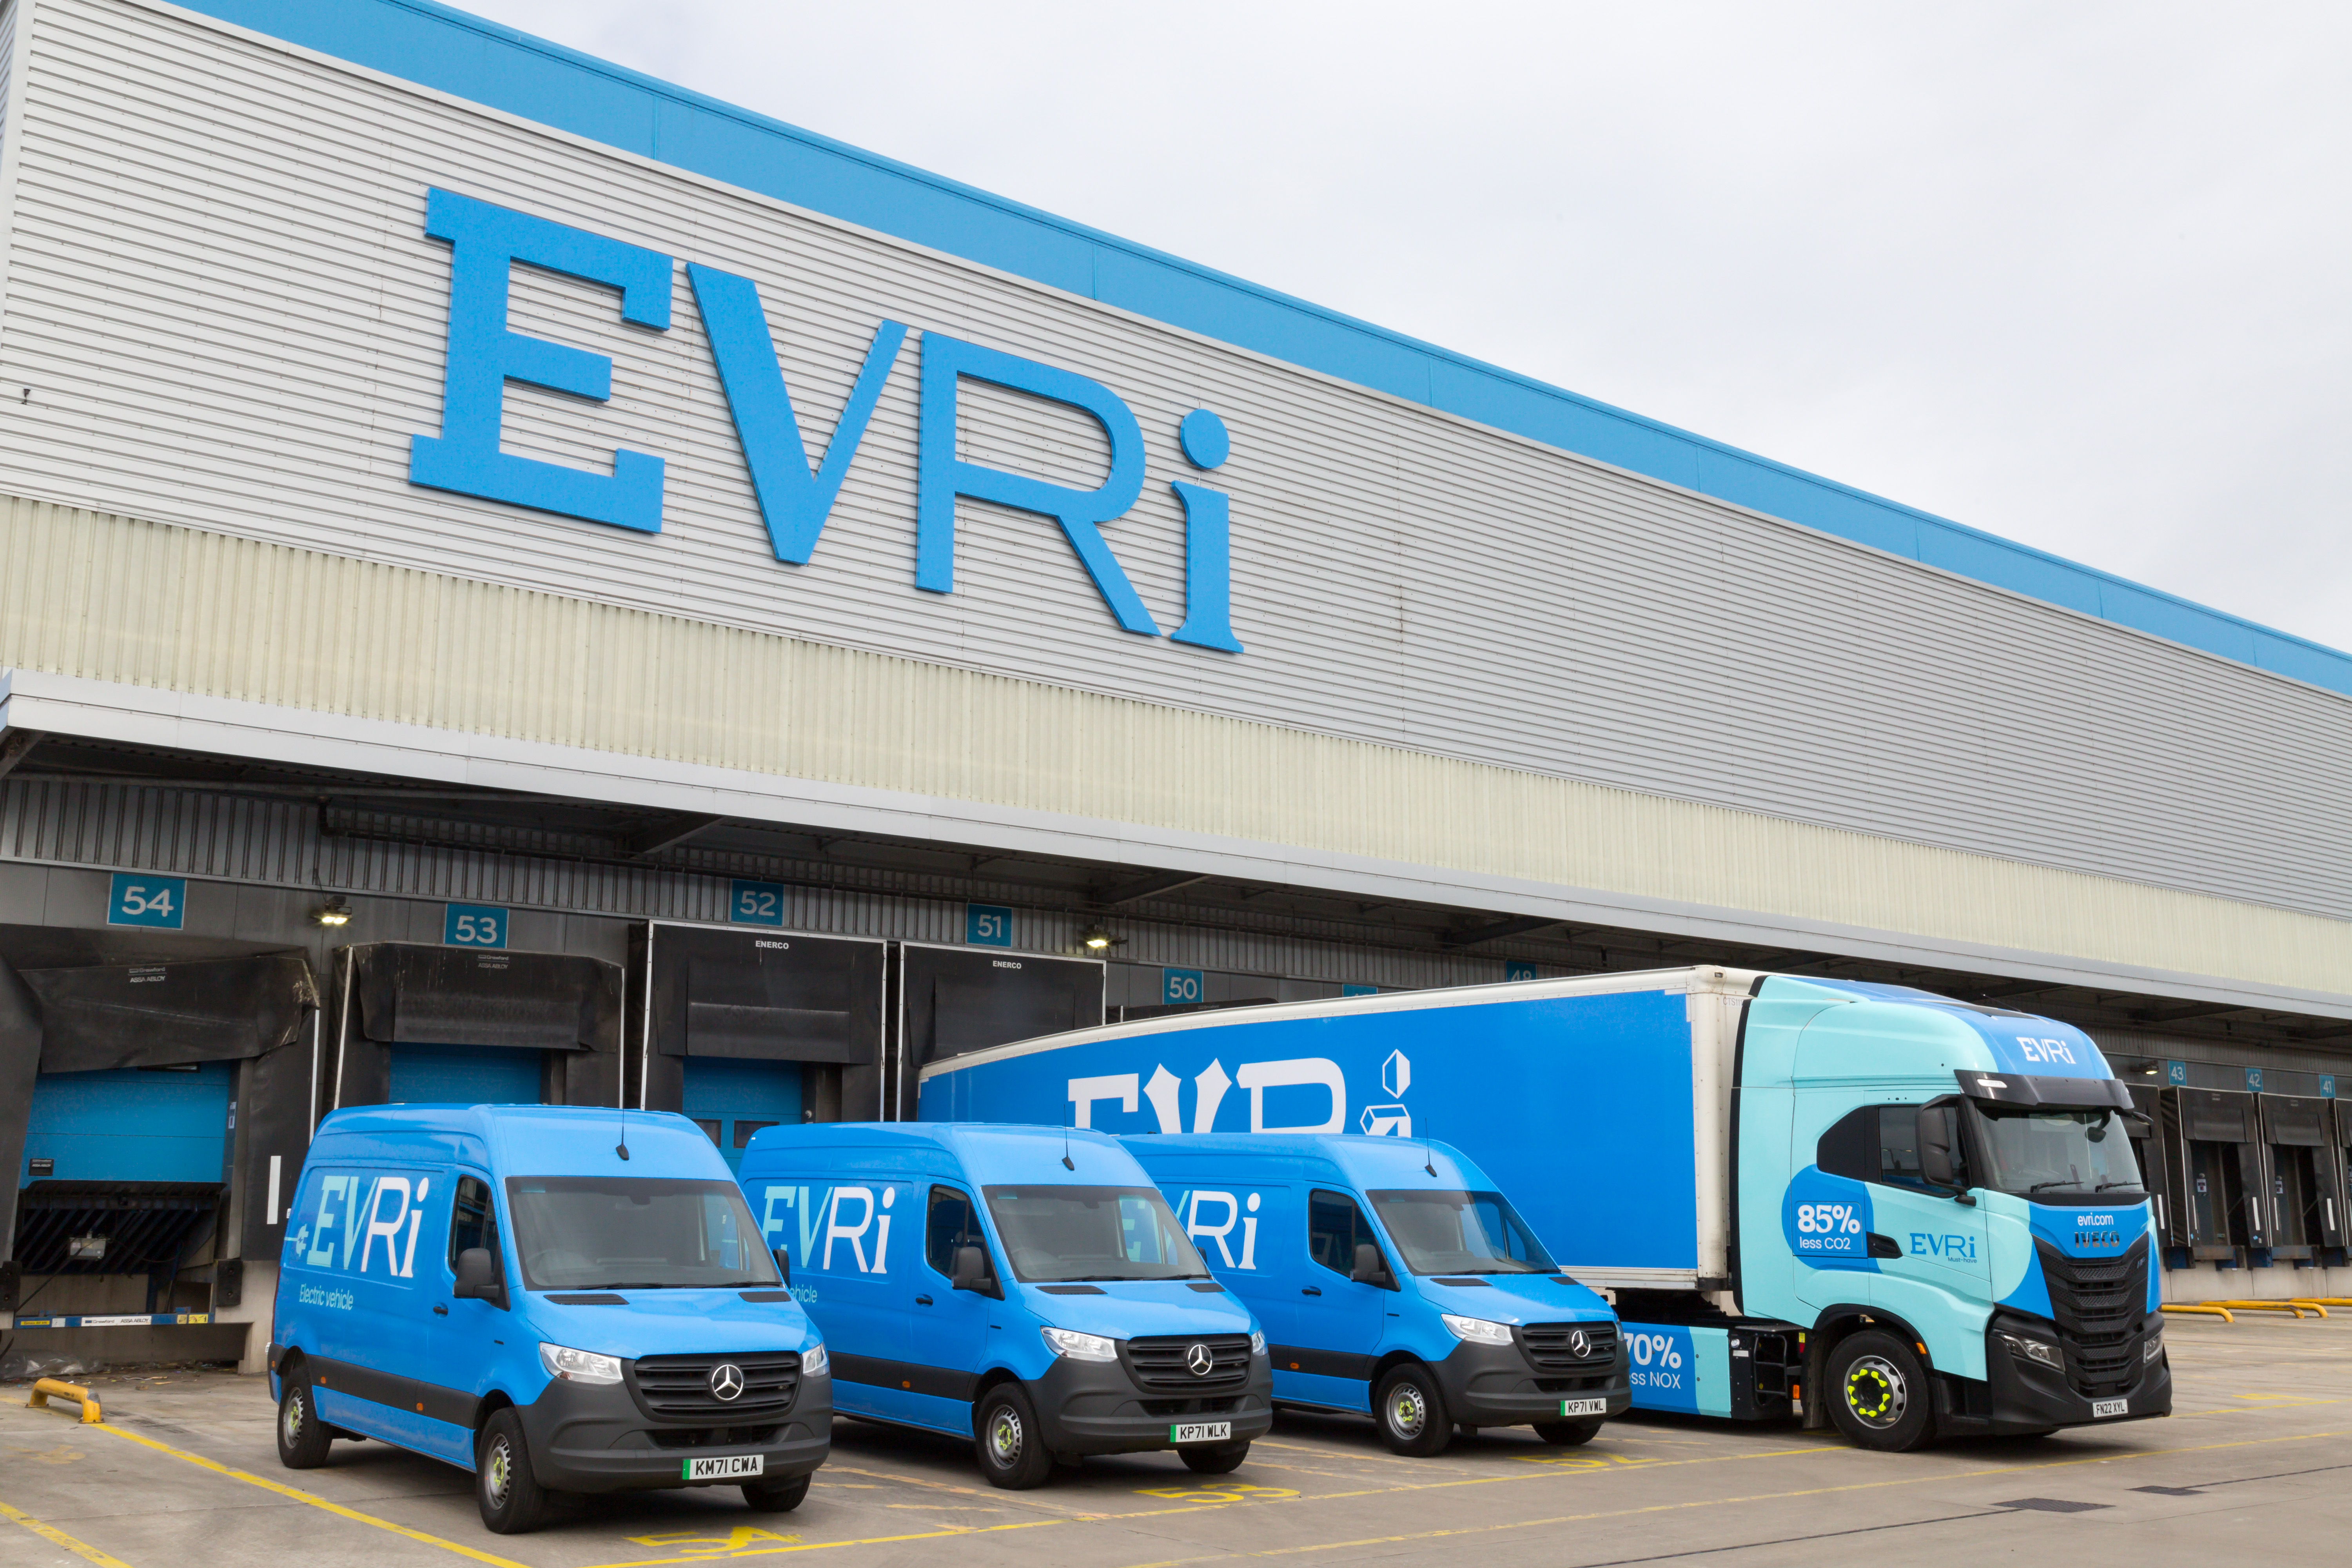 Evri electric and alternative fuel vehicles